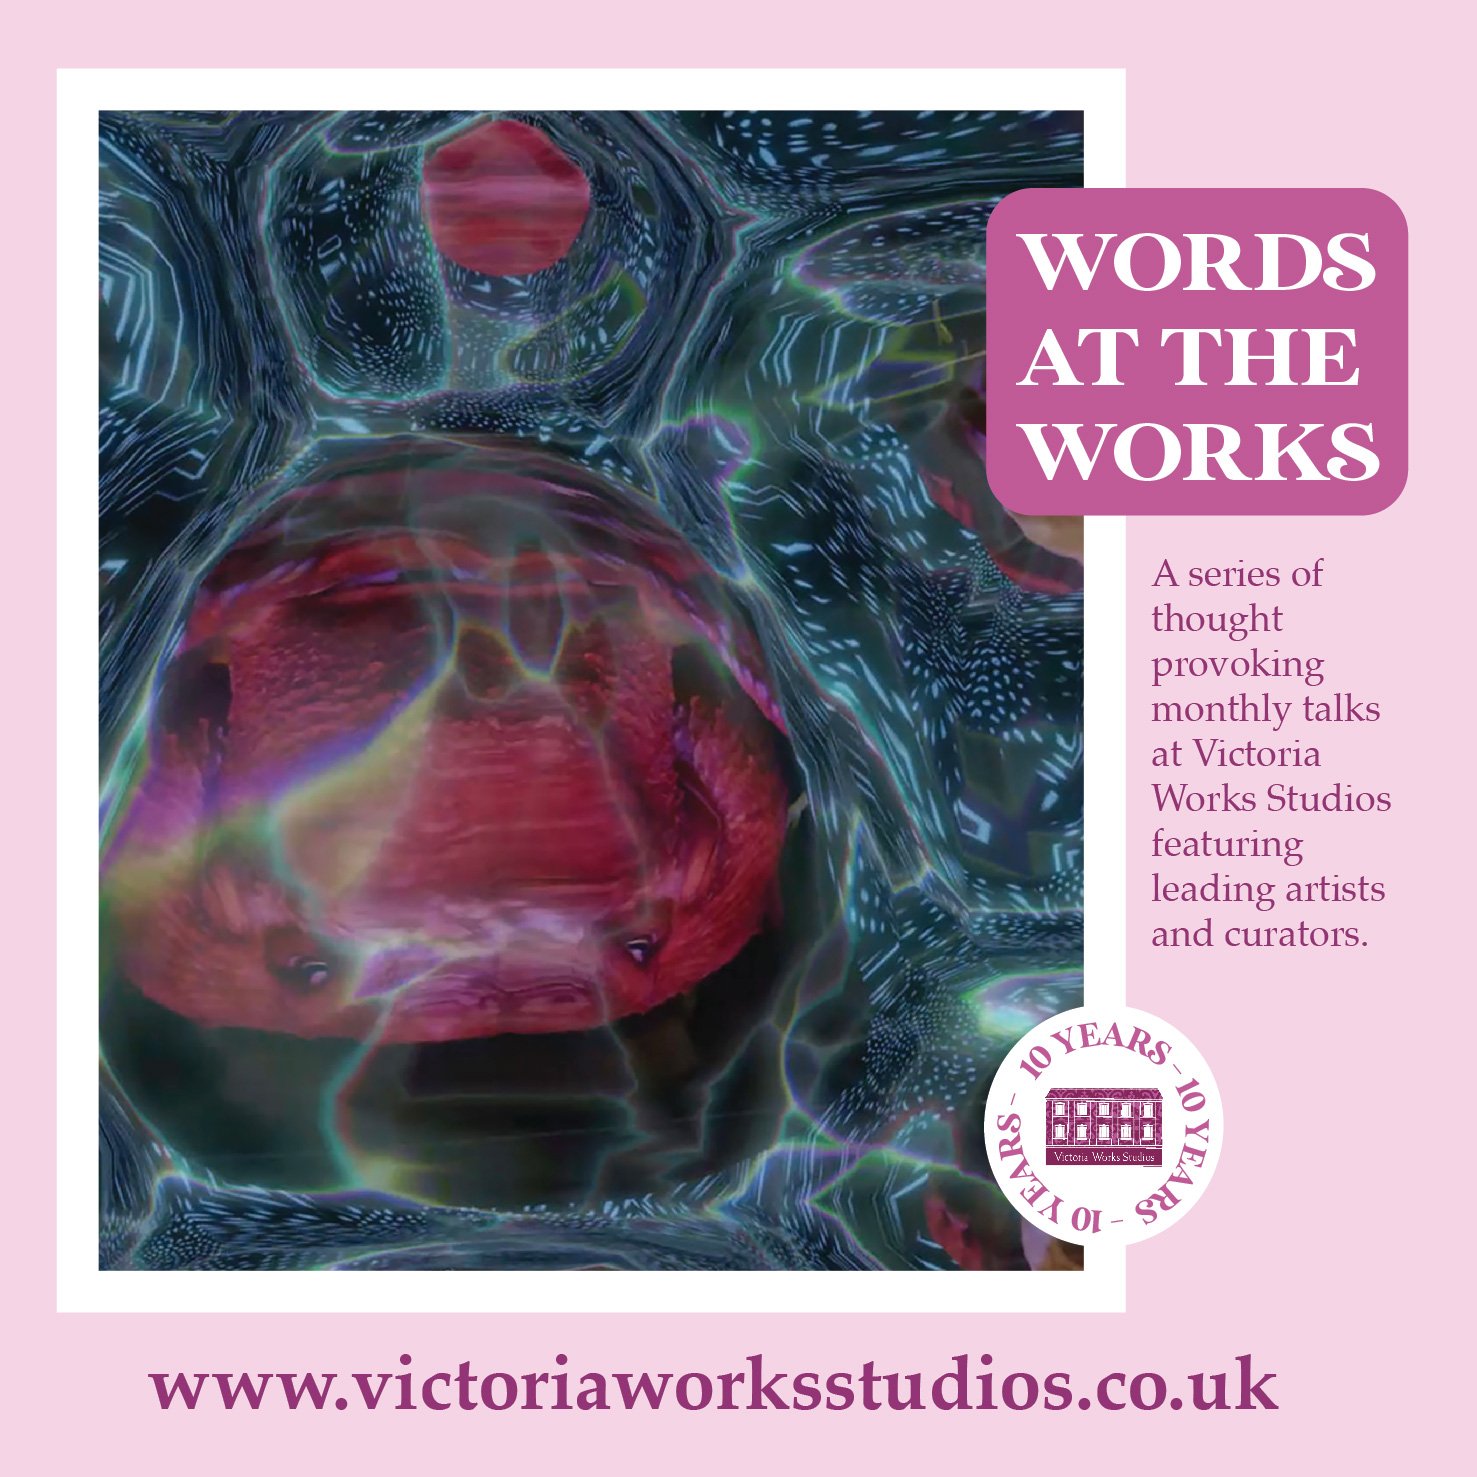 The sun is out and we are looking forward to the summer Words at the Works talks. June 6th sees curator, critic and broadcaster Corinne Julius talking about Future Heritage and the joy of commissioning, while on July 4th, visual artist Maggie Roberts